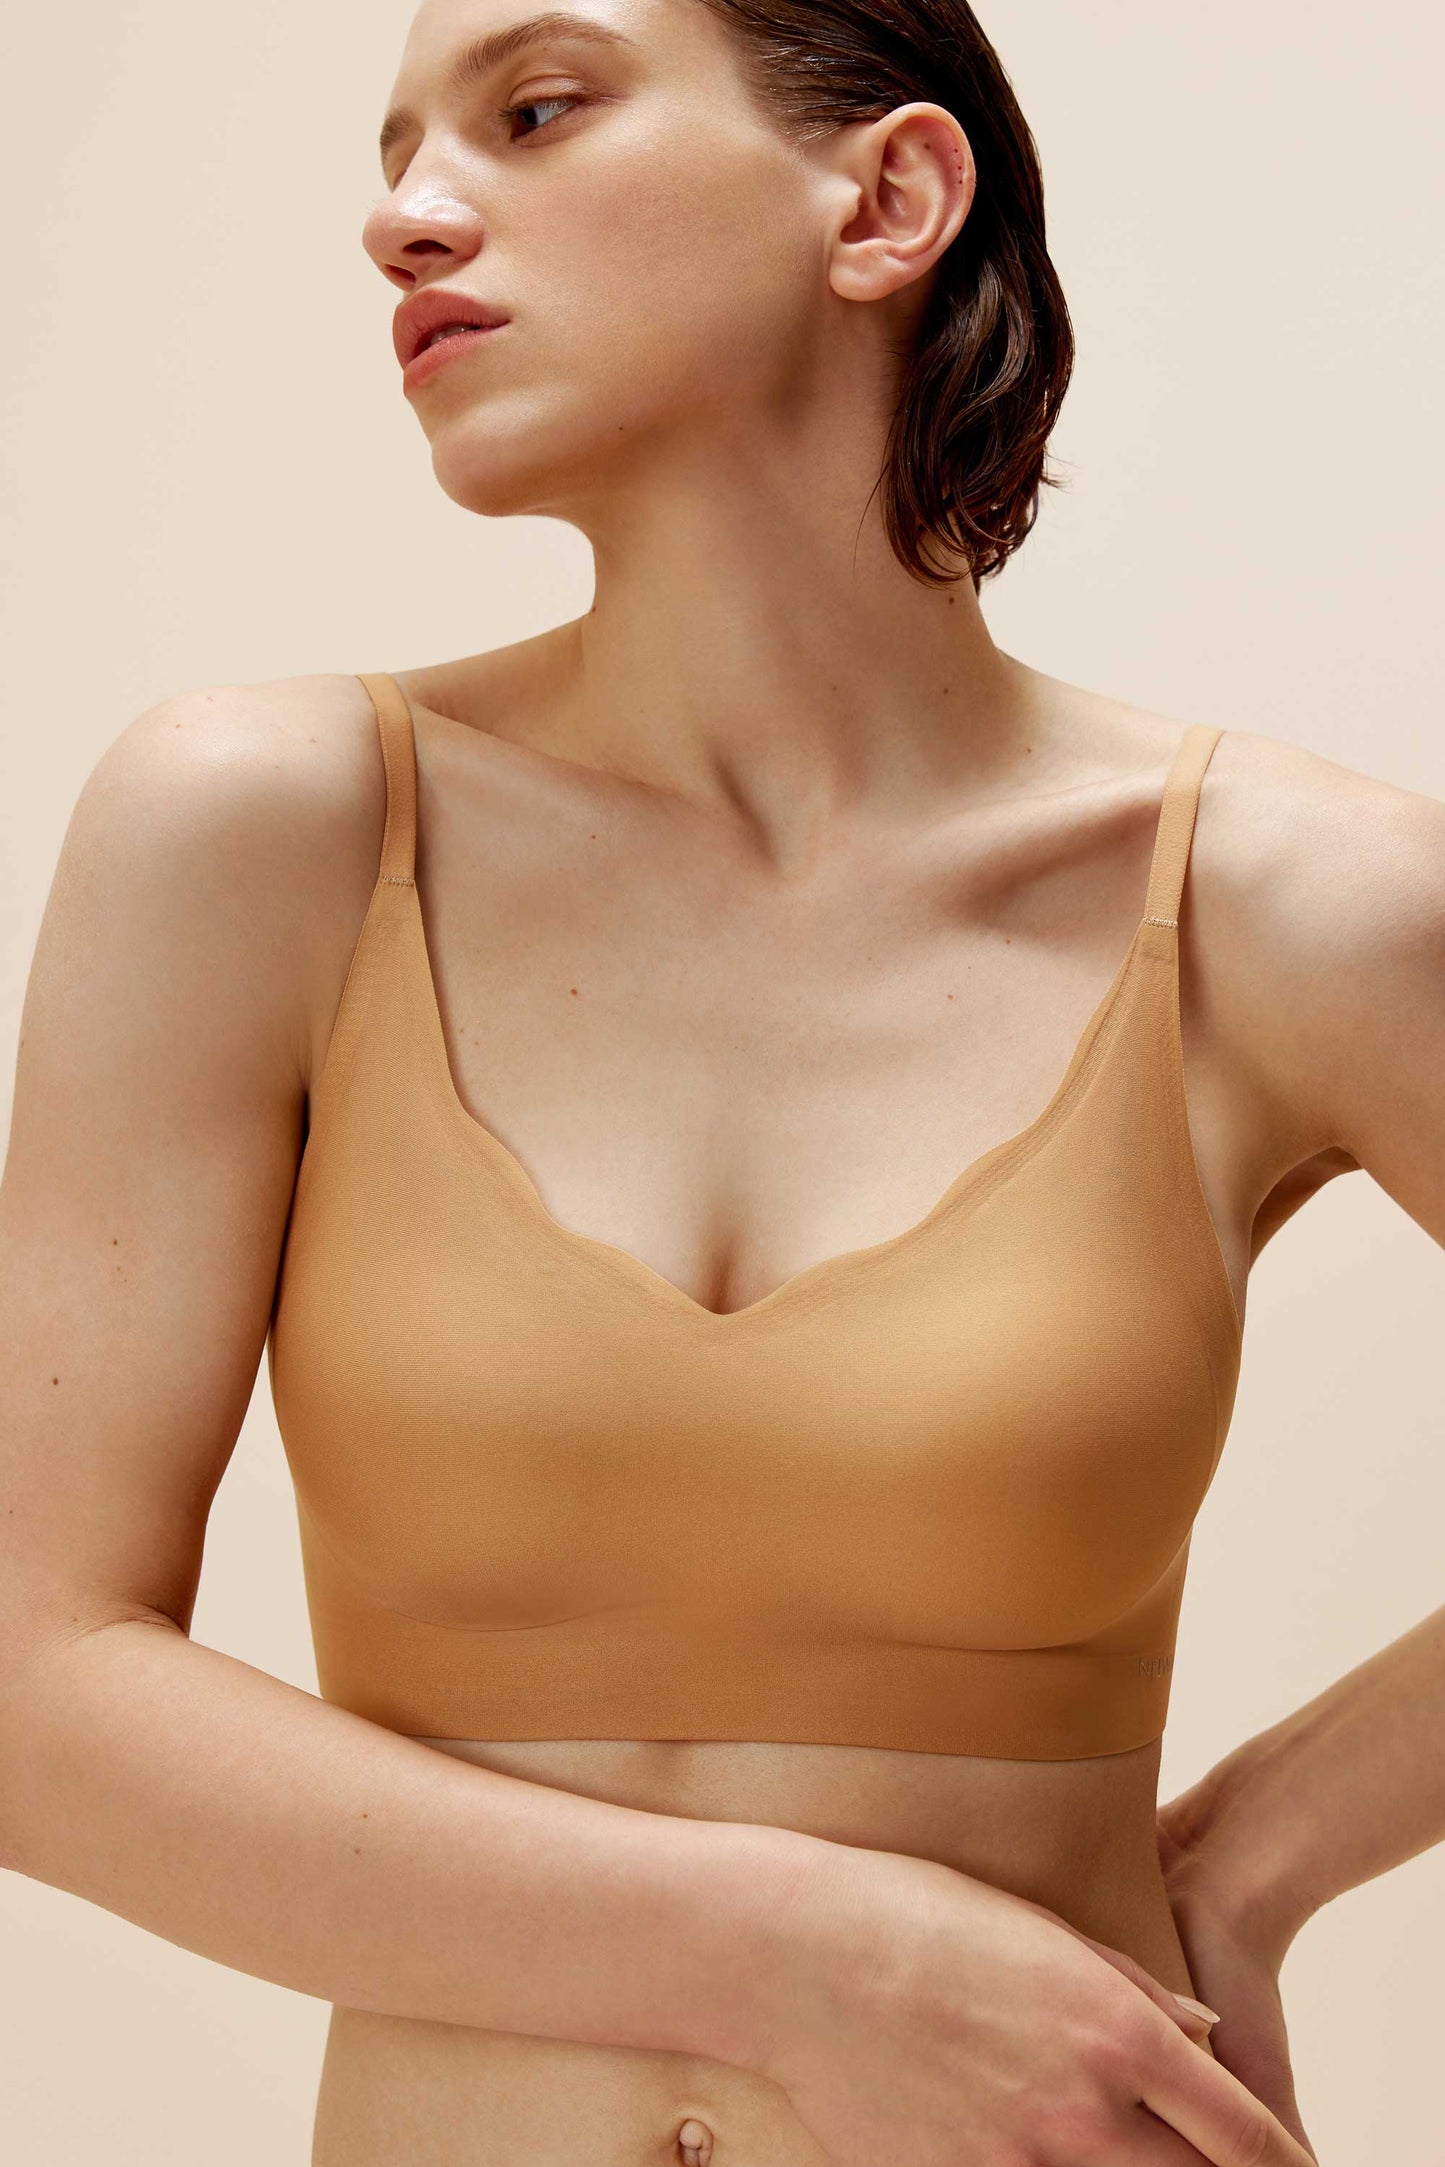 Stylish Bras With a Barely-There Feel From Warner's, True & Co